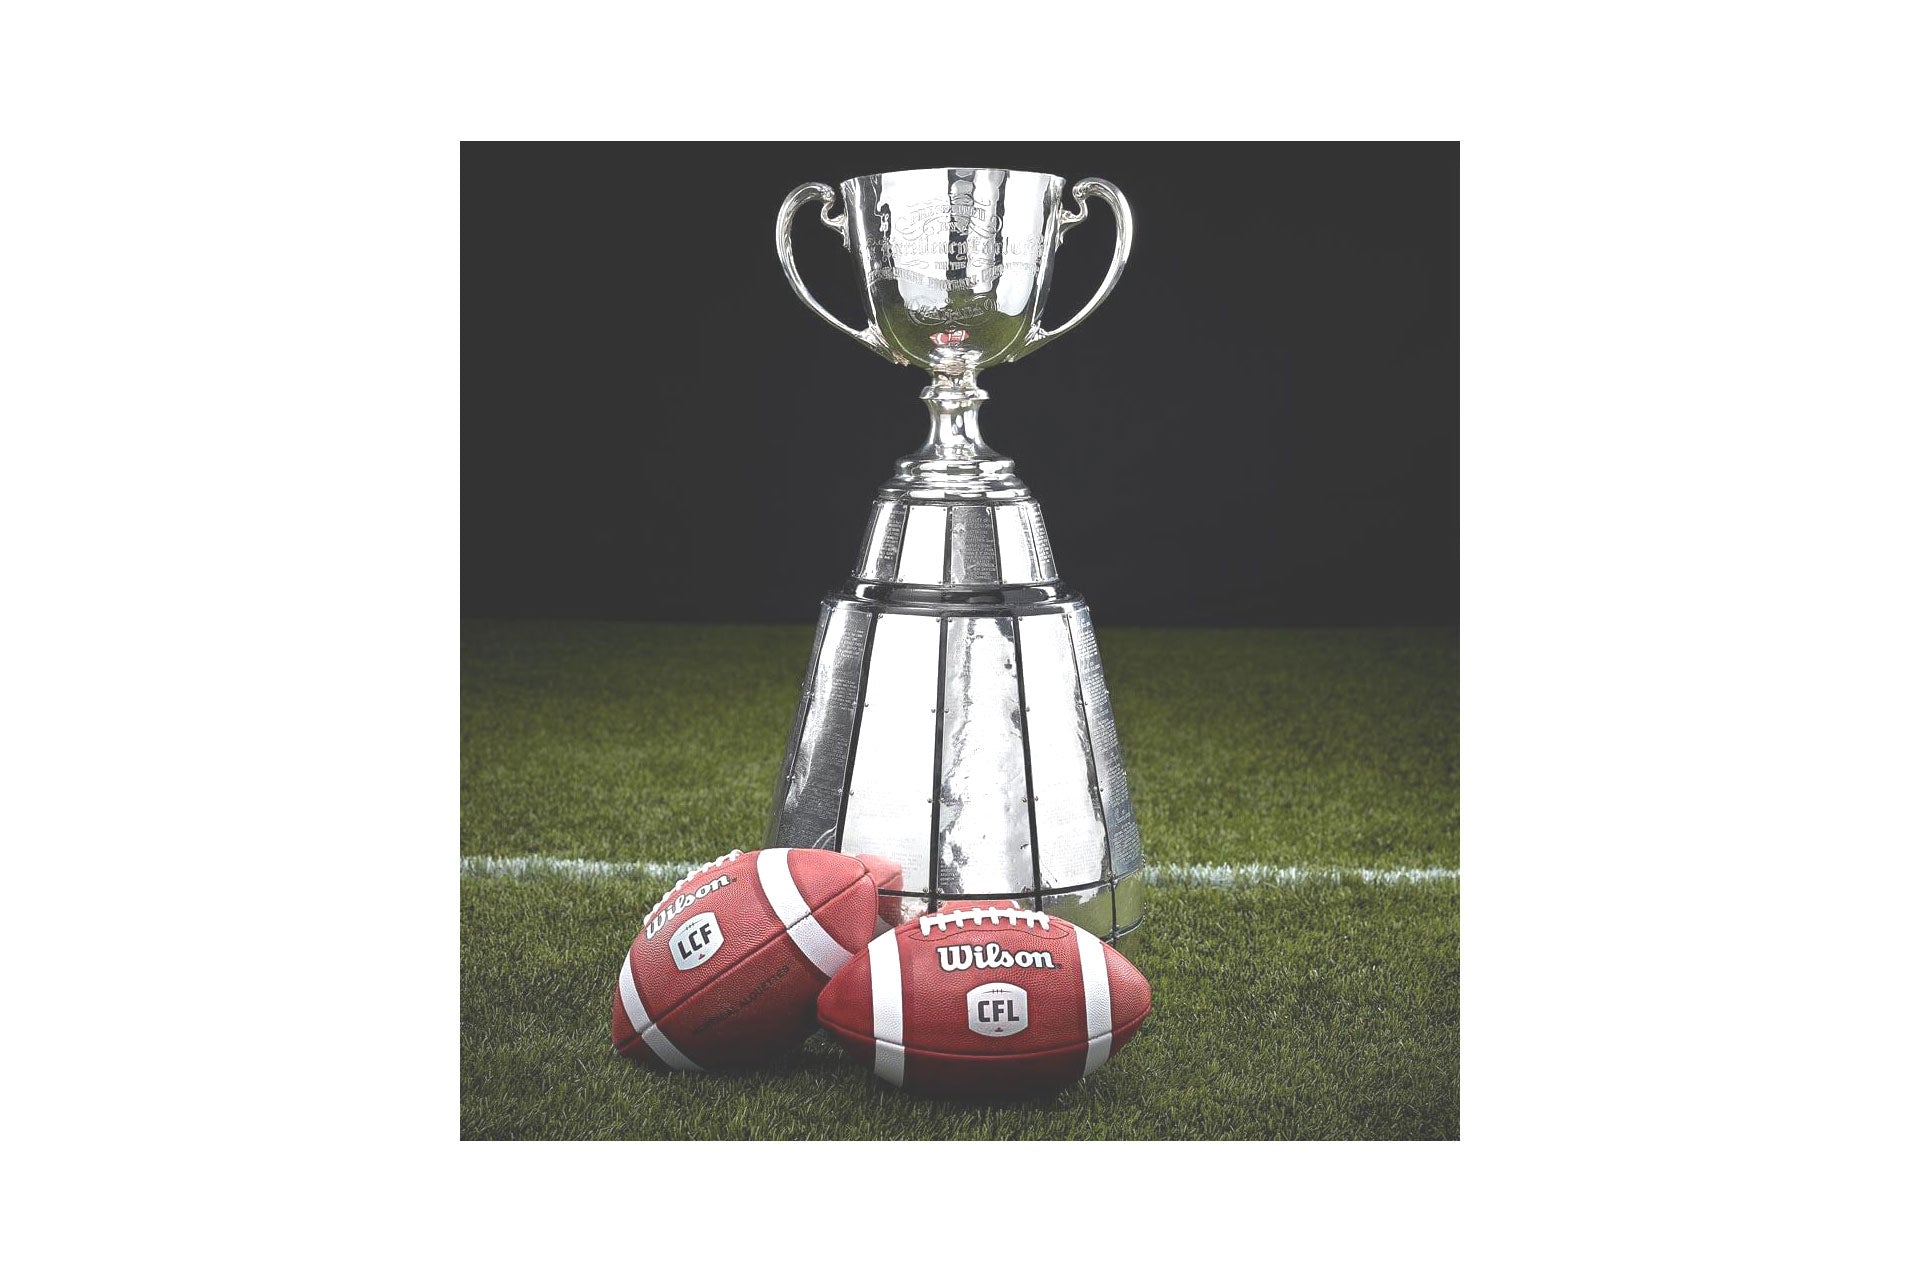 BROOKLIN MODELS AND THE CANADIAN FOOTBALL LEAGUE 